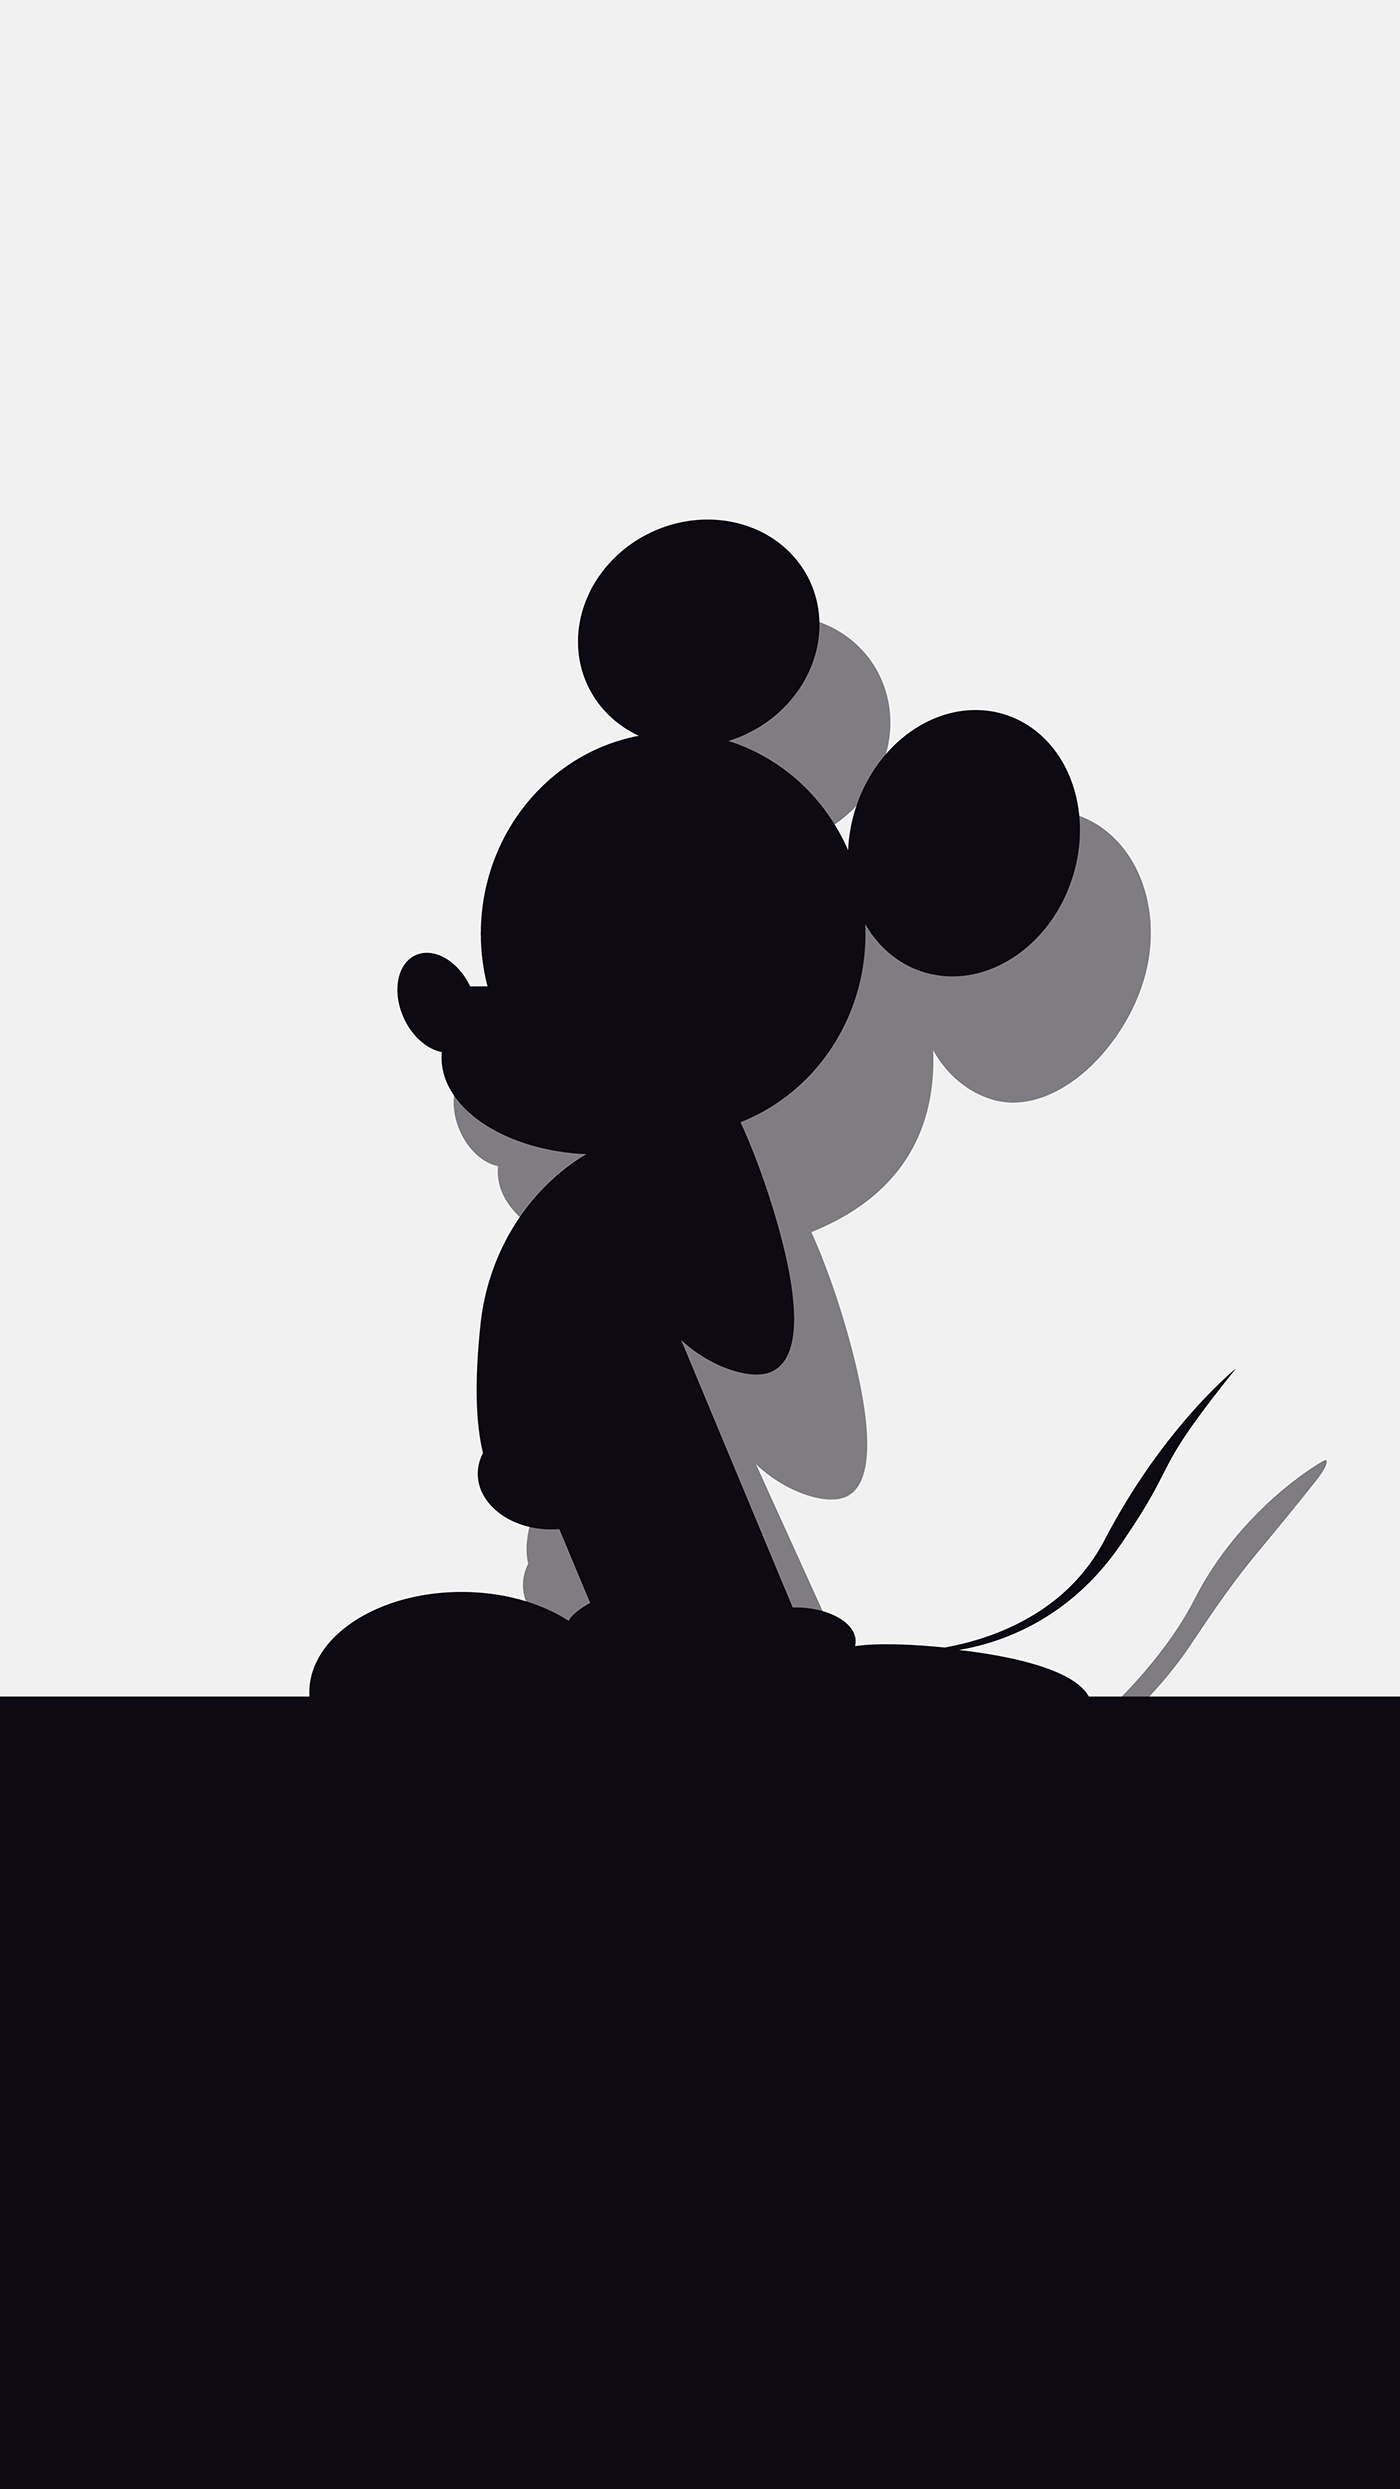 Mickey Mouse Android Wallpapers